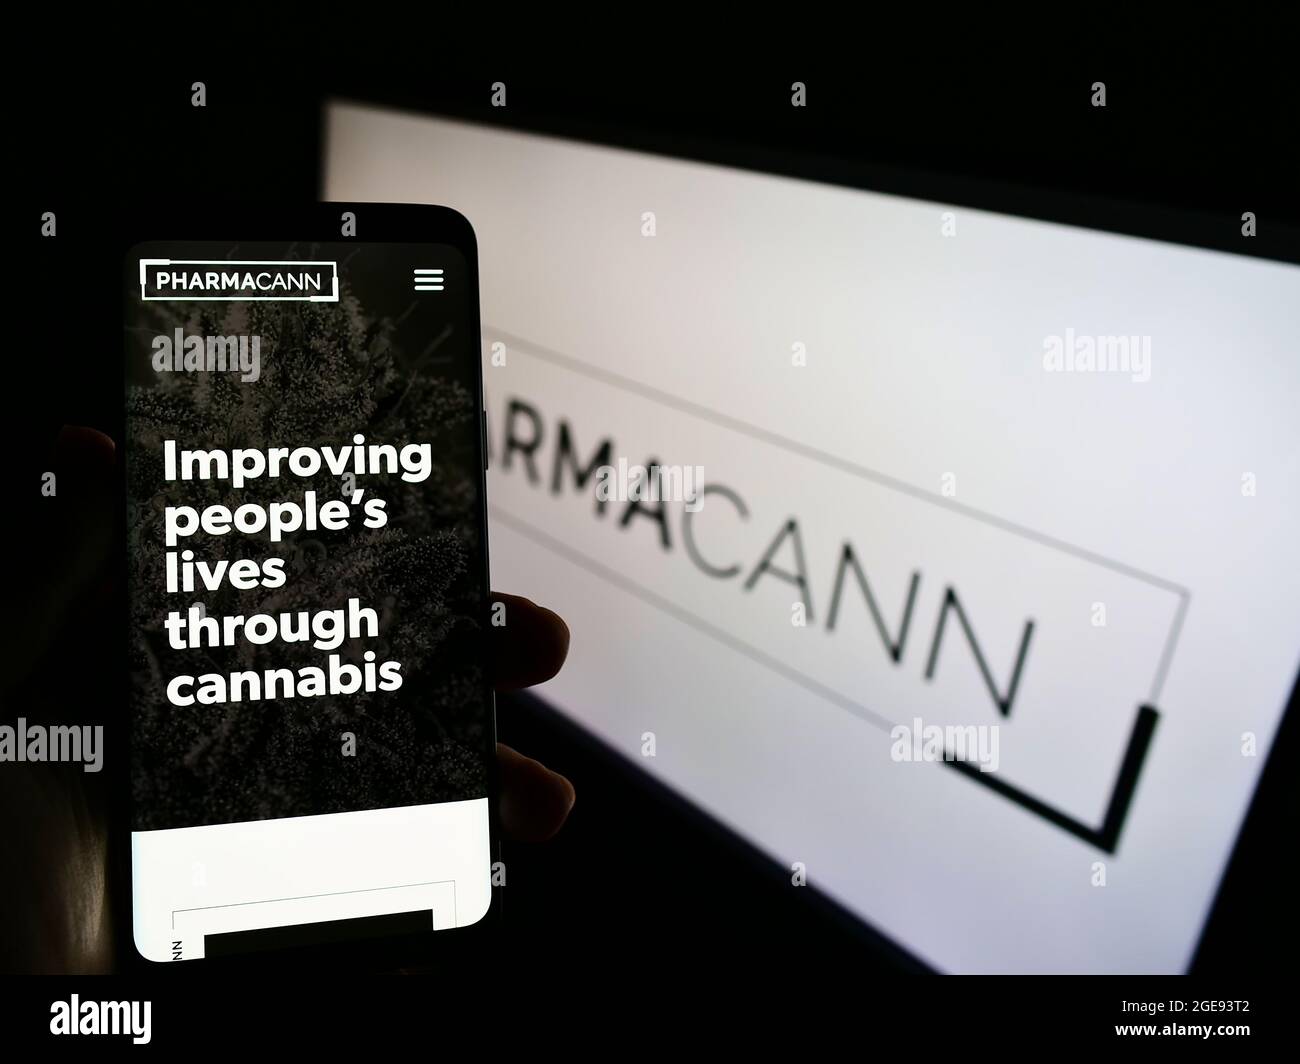 Person holding smartphone with website of US cannabis company PharmaCann Inc. on screen in front of business logo. Focus on center of phone display. Stock Photo